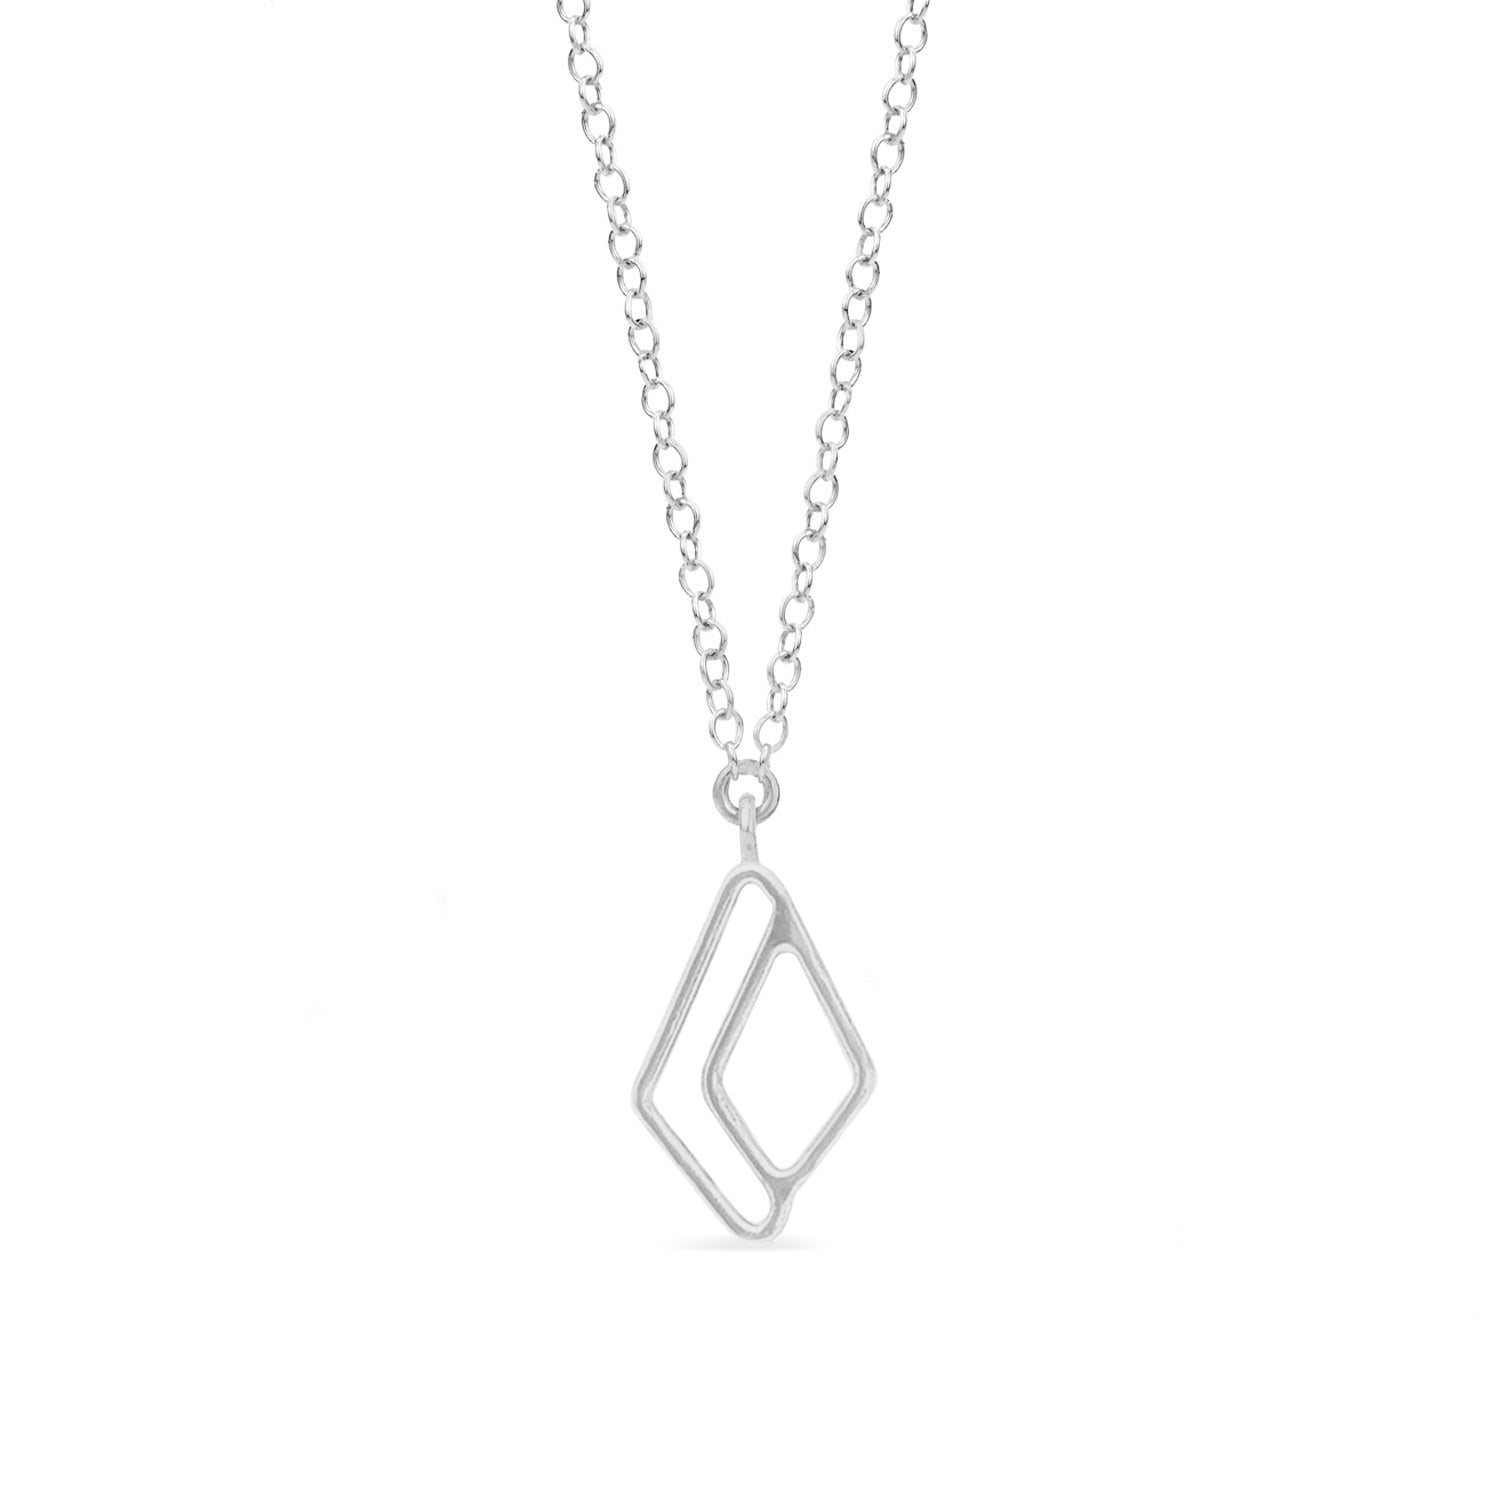 Open diamond pendant necklace in sterling silver